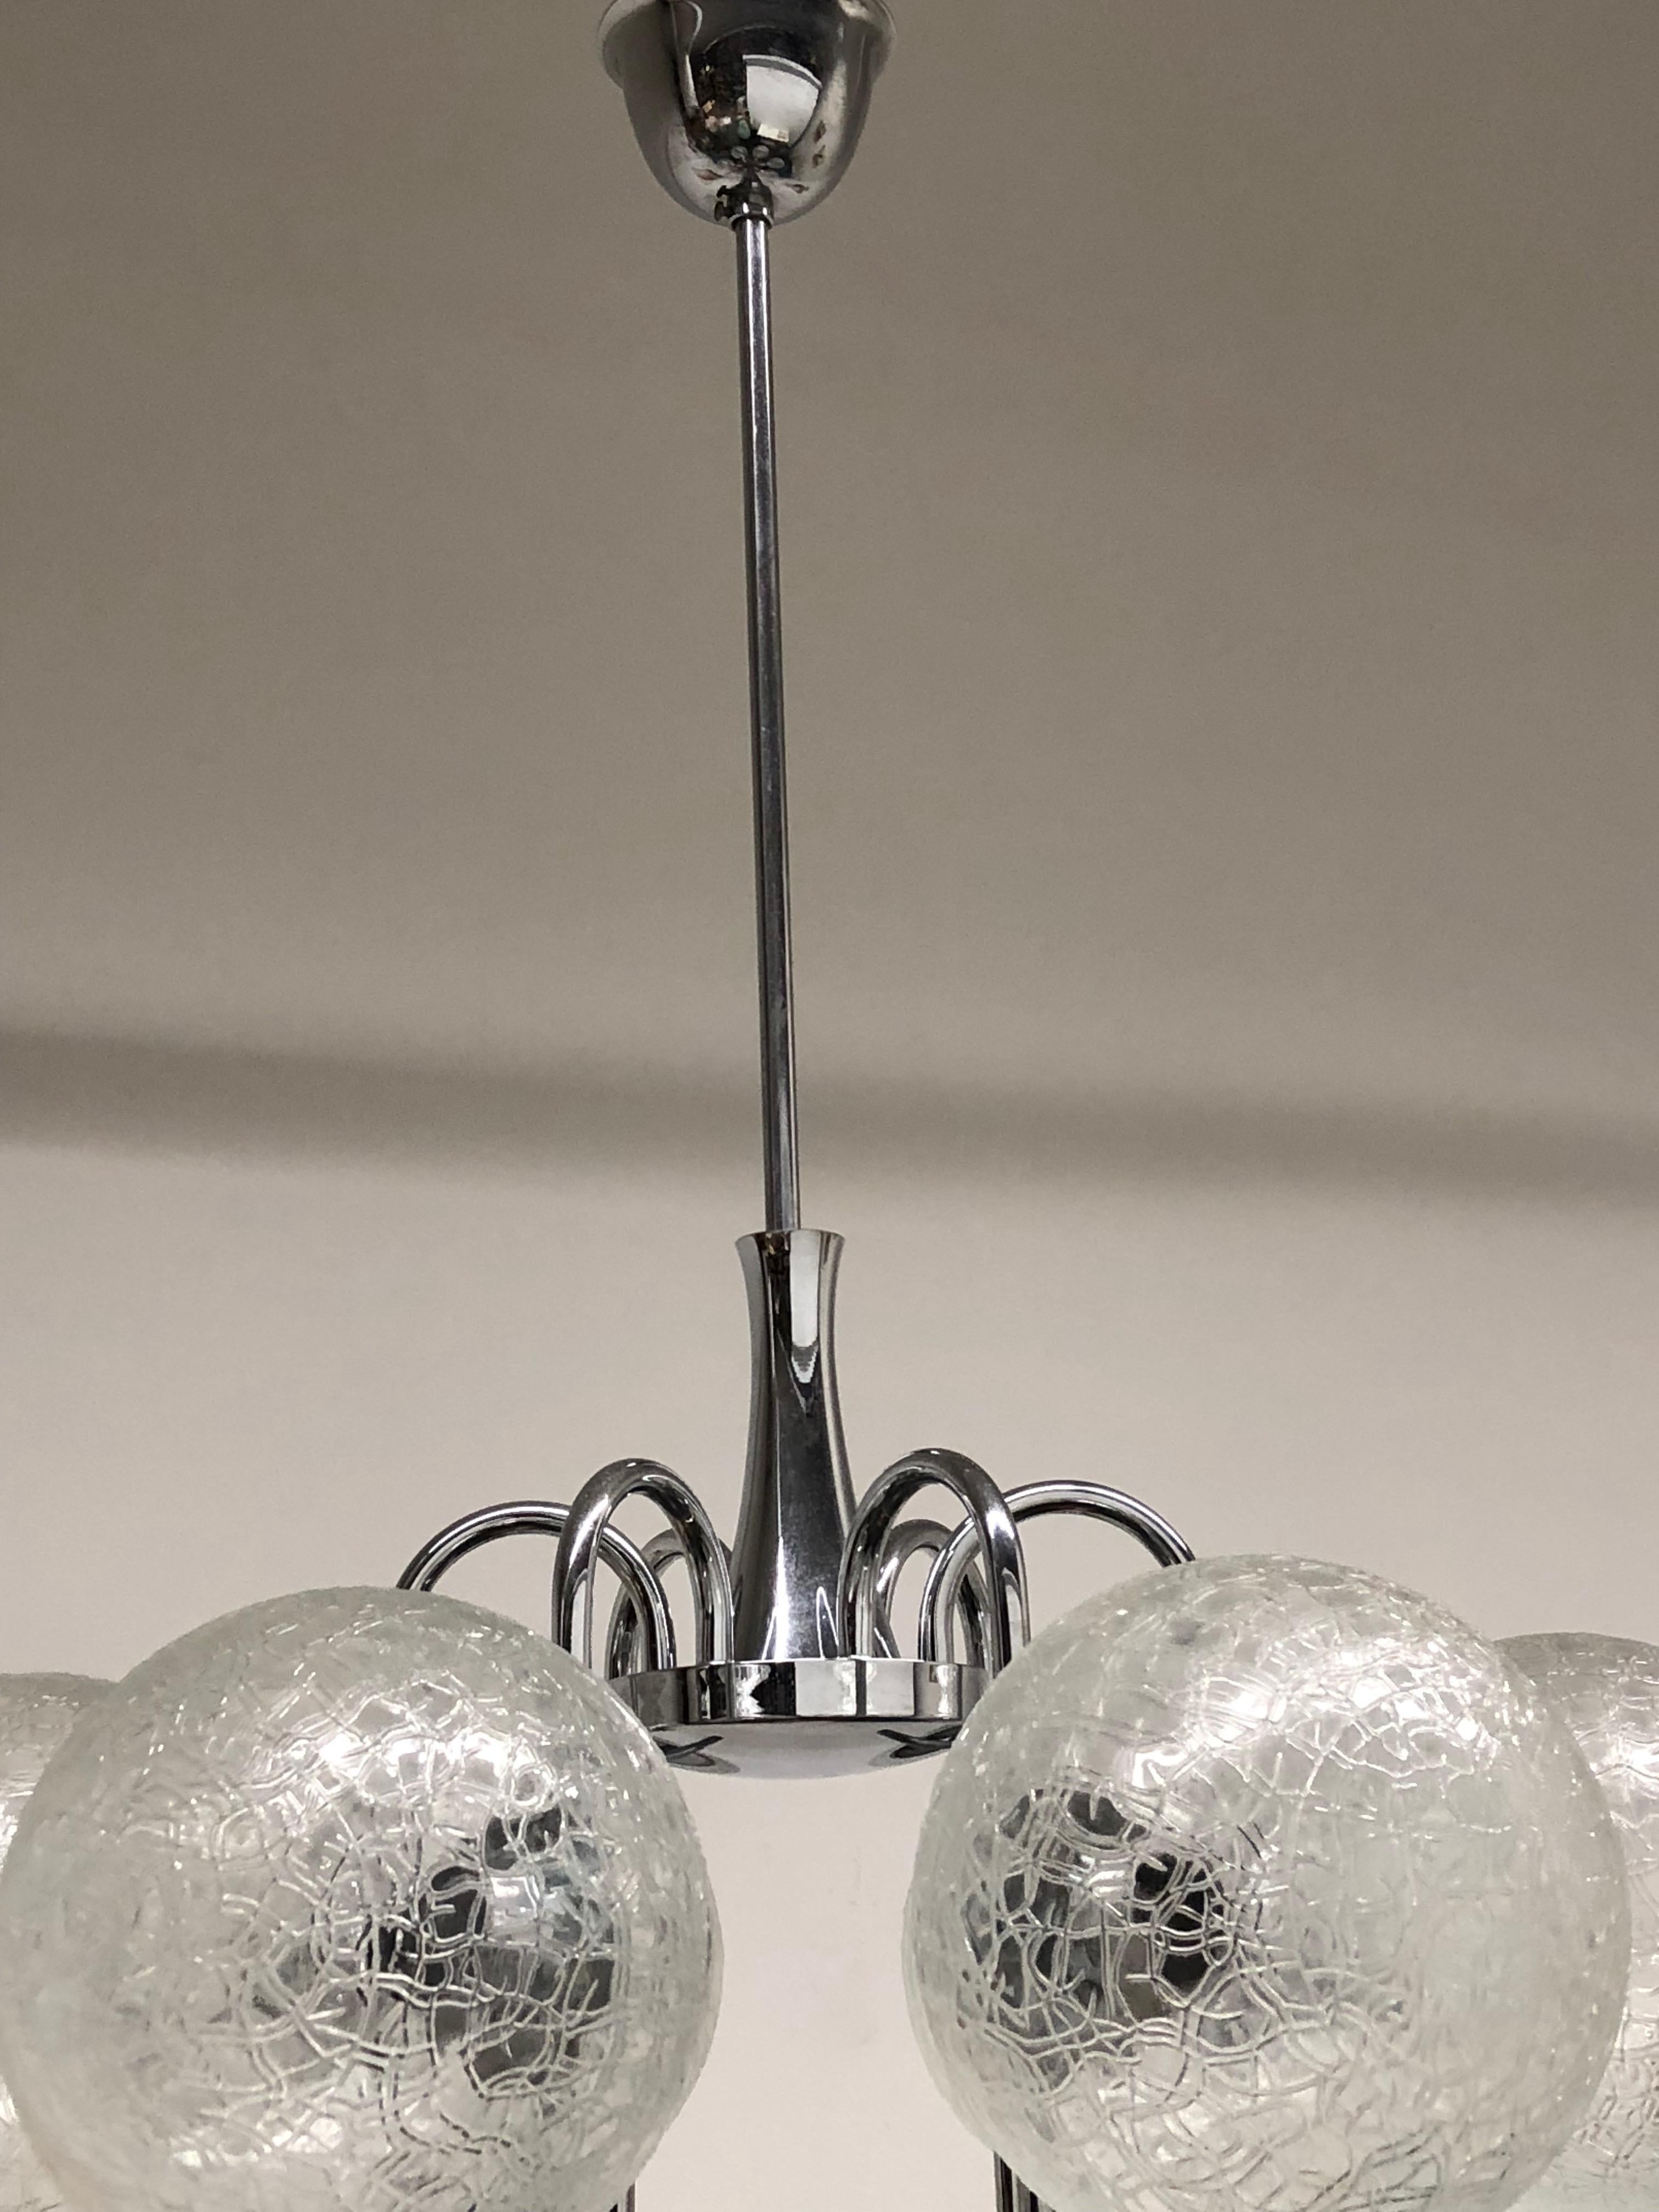 Mid-20th Century German Mid-Century Modern Polished Chrome and Glass Ball Sputnik Chandelier For Sale